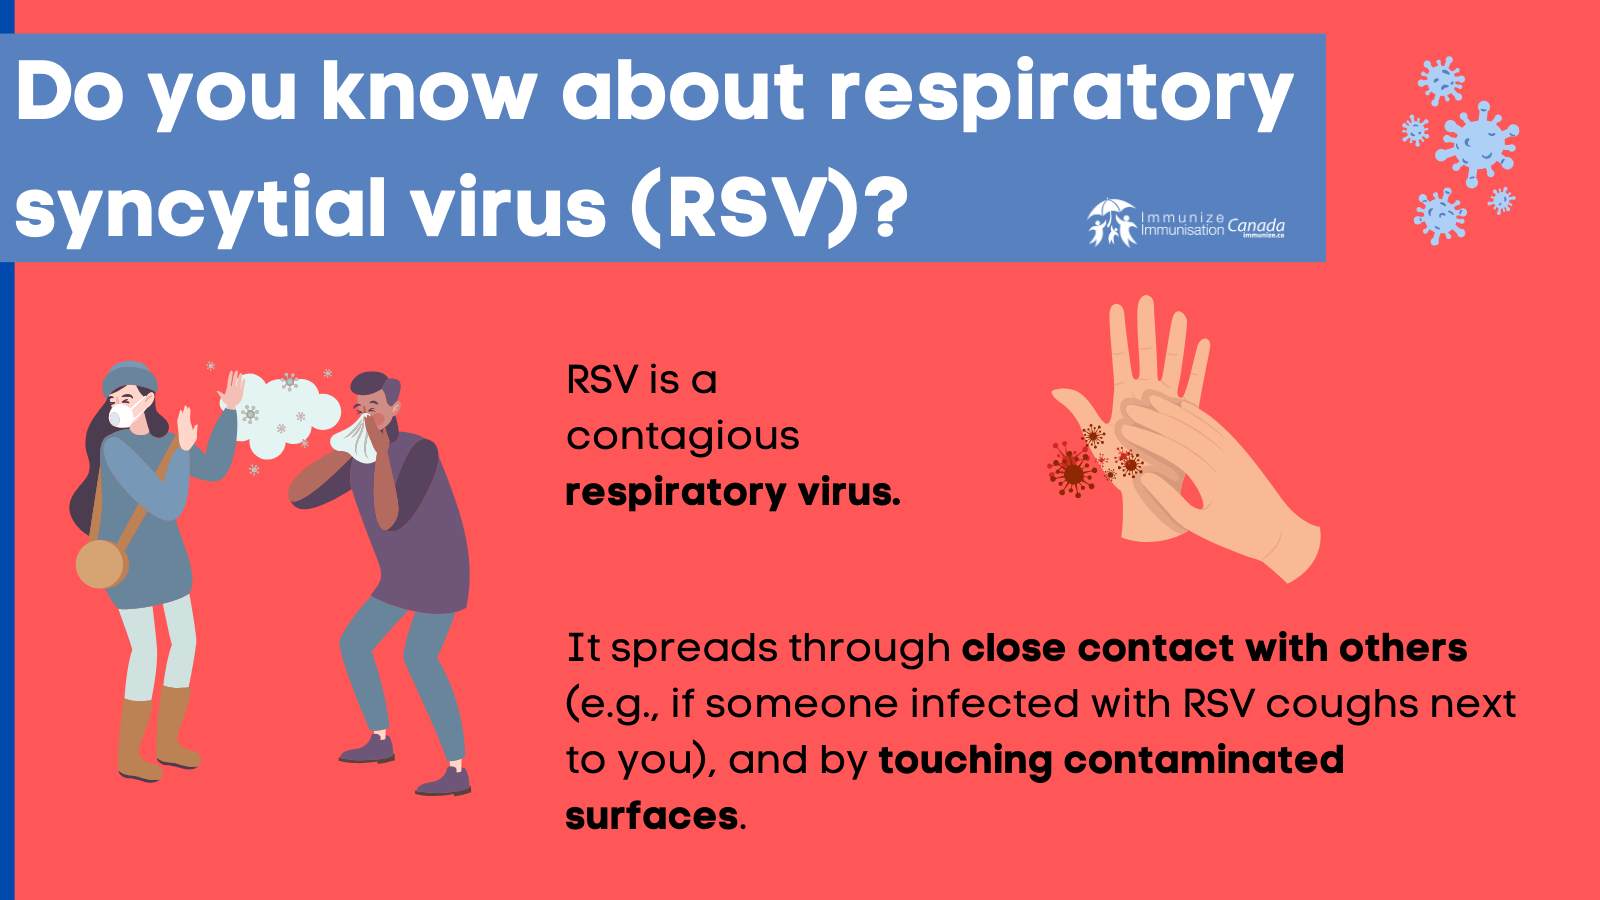 ​Do you know about respiratory syncytial virus (RSV)? - image 2 for Twitter